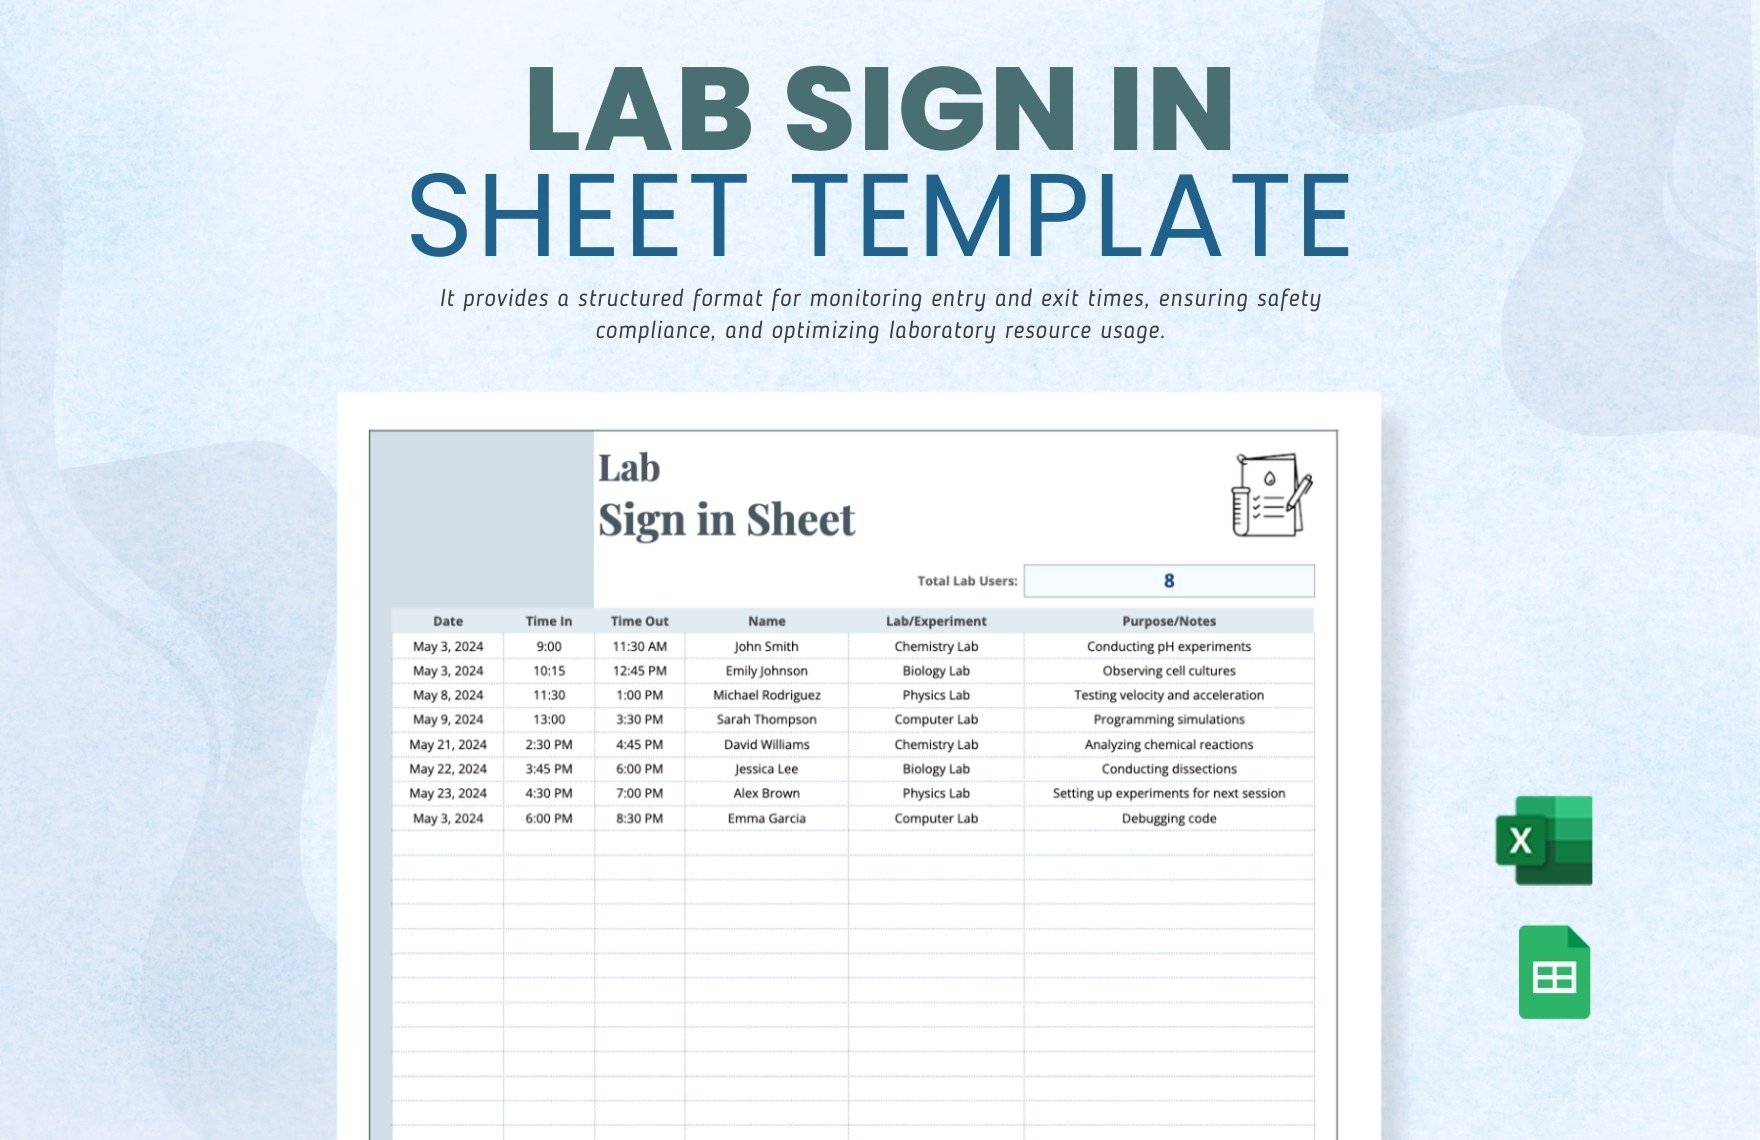 Lab Sign in Sheet Template in Excel, Google Sheets